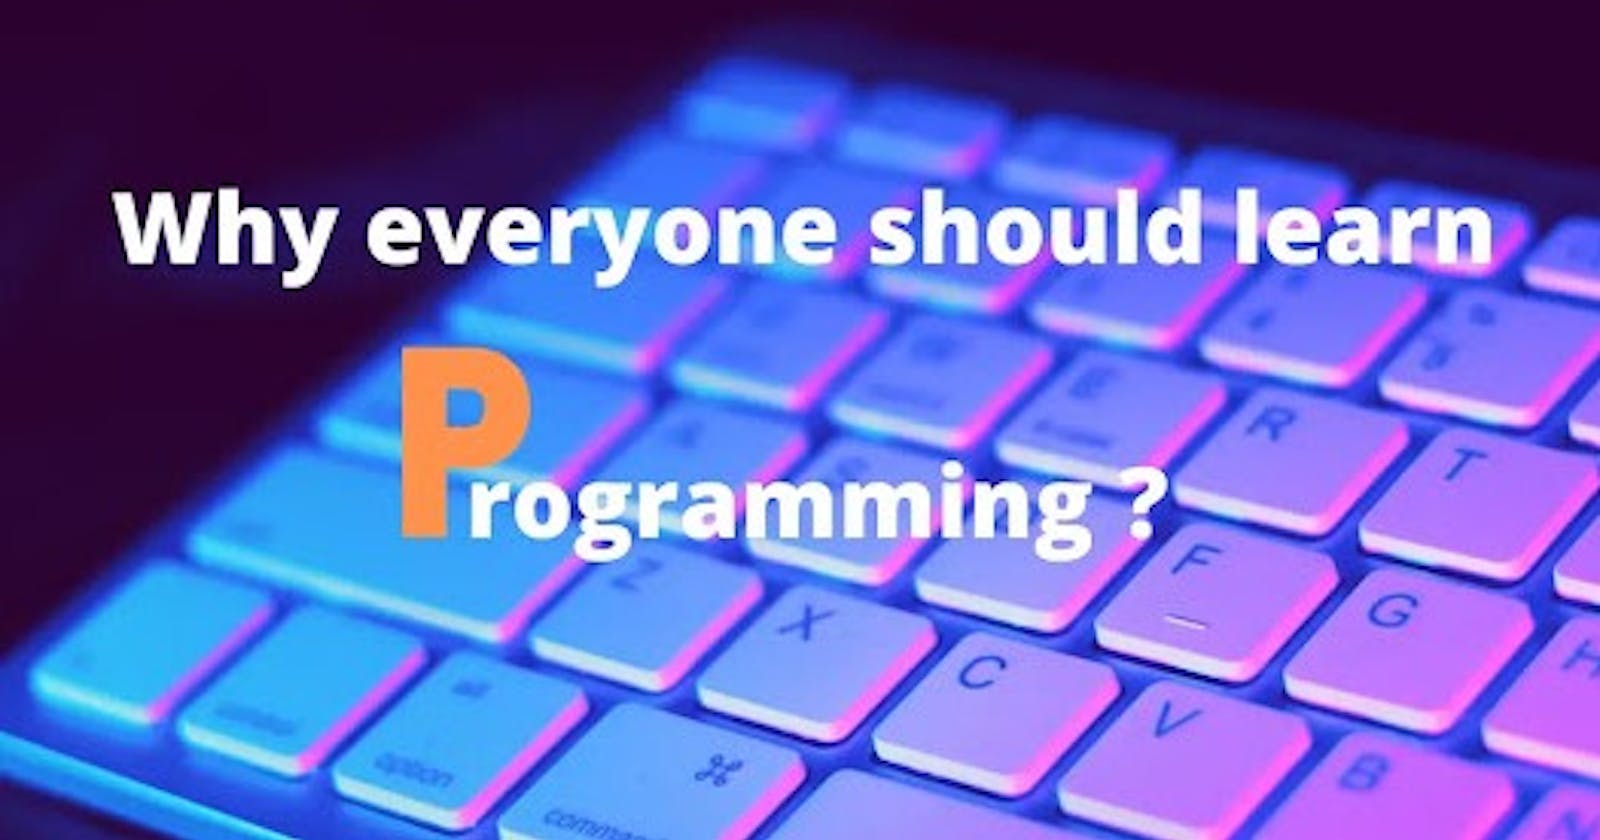 Why everyone should learn programming?